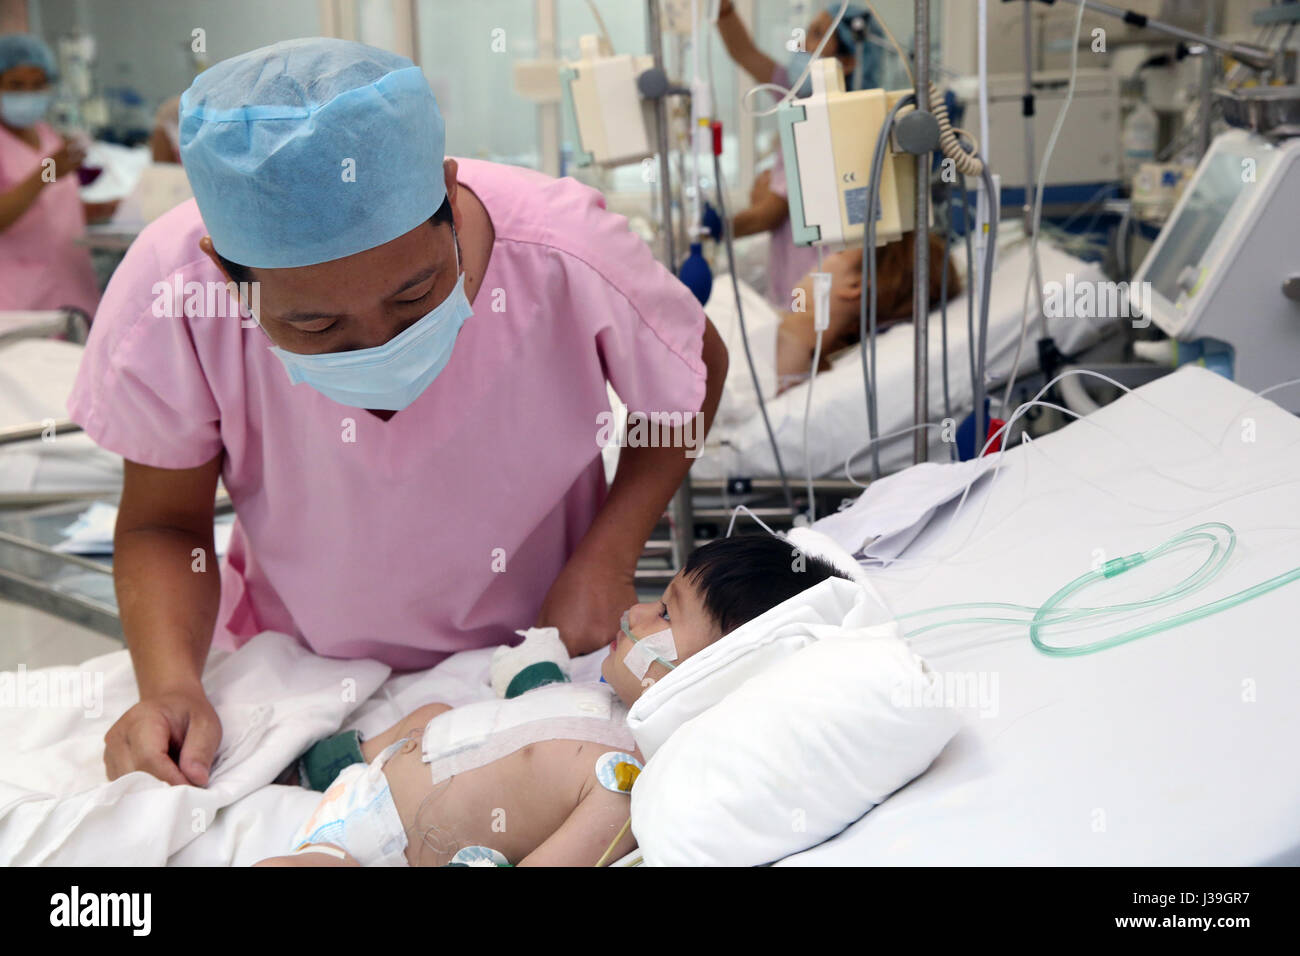 The heart institute offer high-quality care to vietnamese patients suffering from heart diseases. intensive care unit. Stock Photo